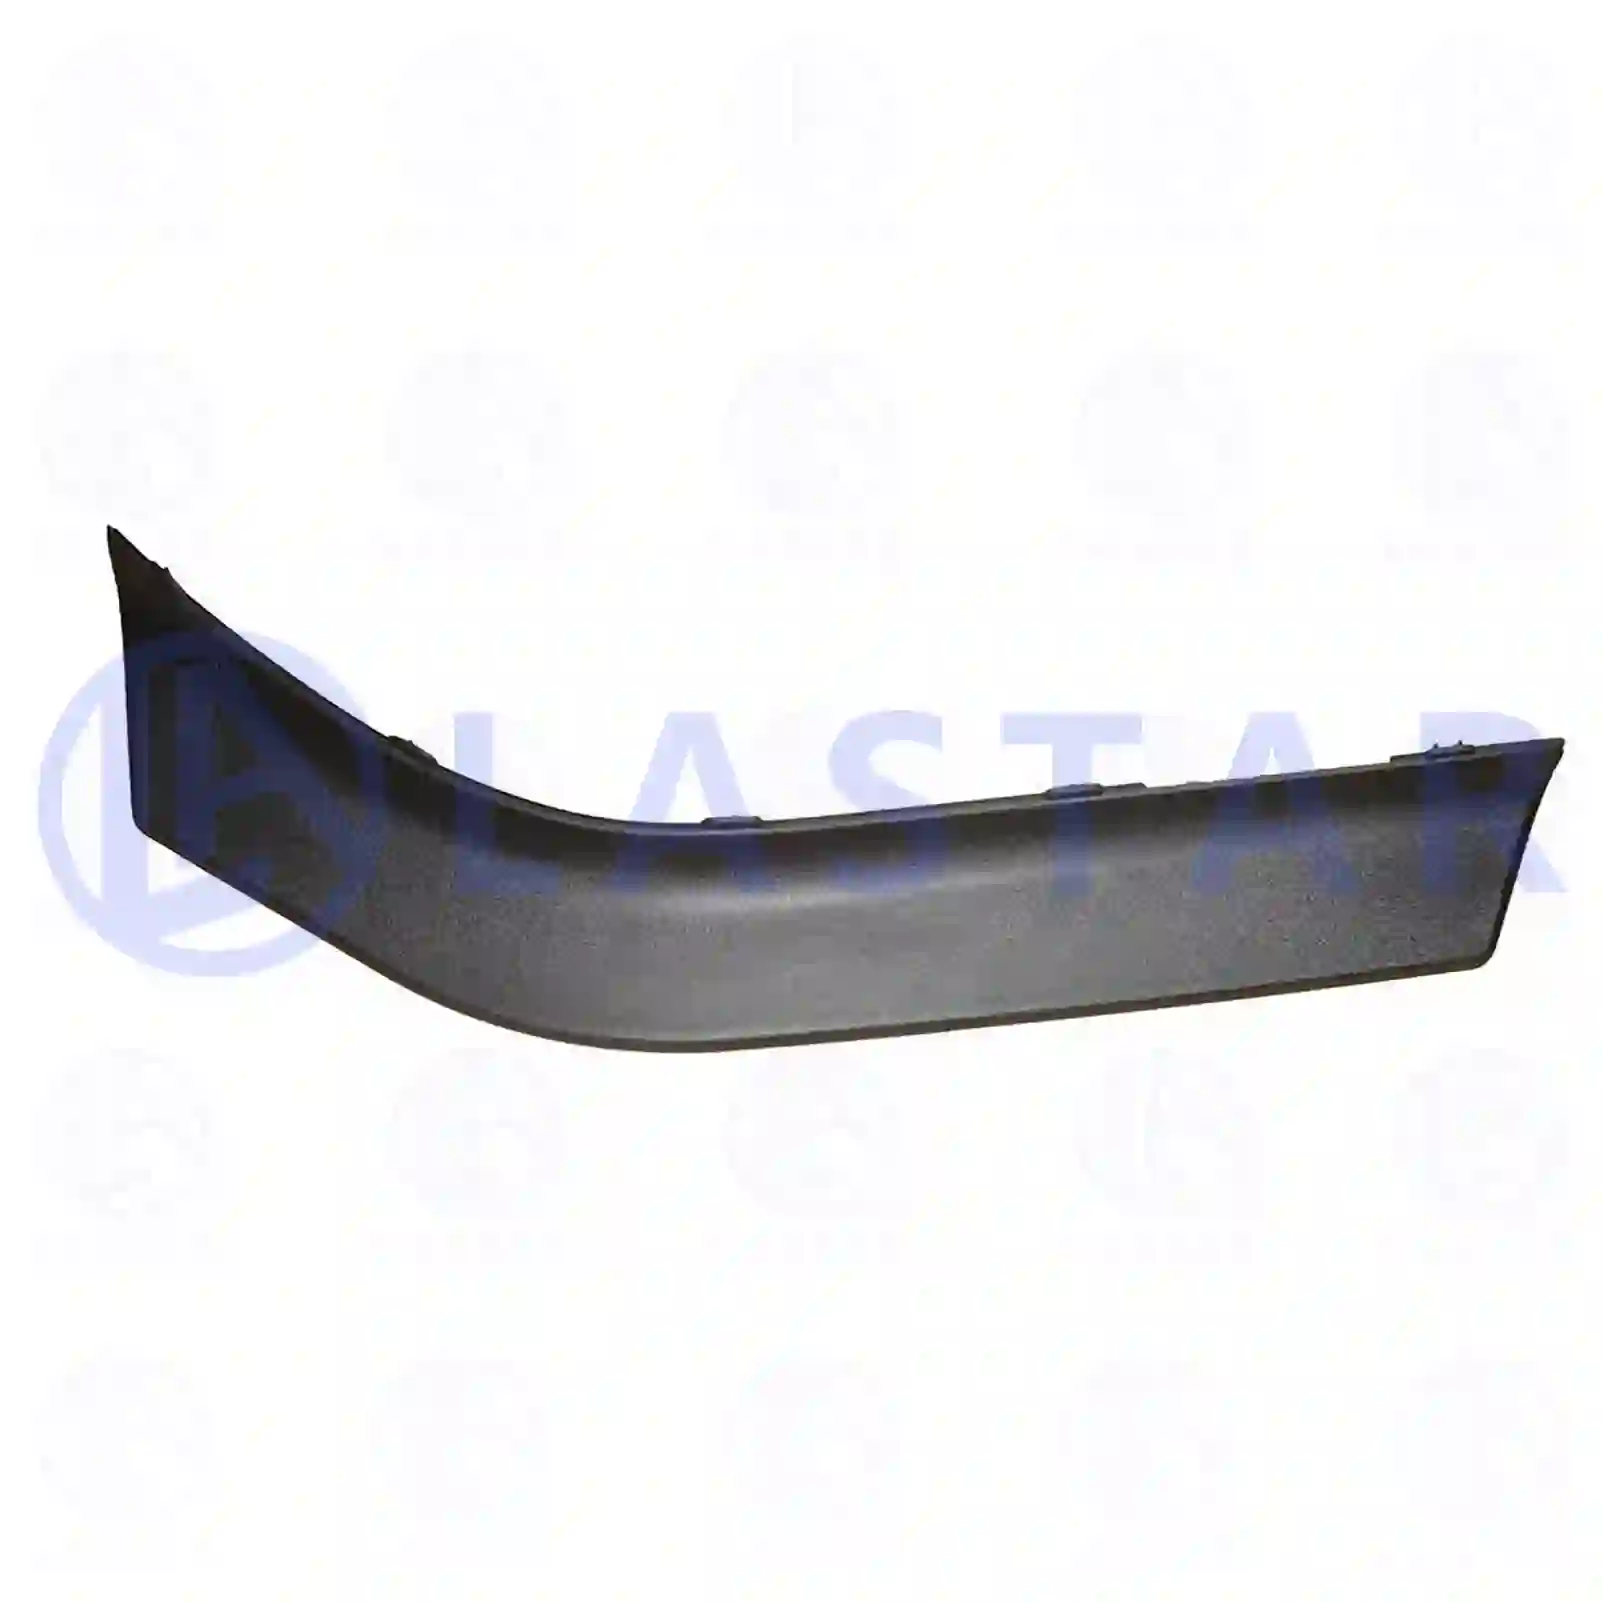 Fender cover, right, 77721510, 1324606, 1429394, 1517650, ZG60752-0008 ||  77721510 Lastar Spare Part | Truck Spare Parts, Auotomotive Spare Parts Fender cover, right, 77721510, 1324606, 1429394, 1517650, ZG60752-0008 ||  77721510 Lastar Spare Part | Truck Spare Parts, Auotomotive Spare Parts